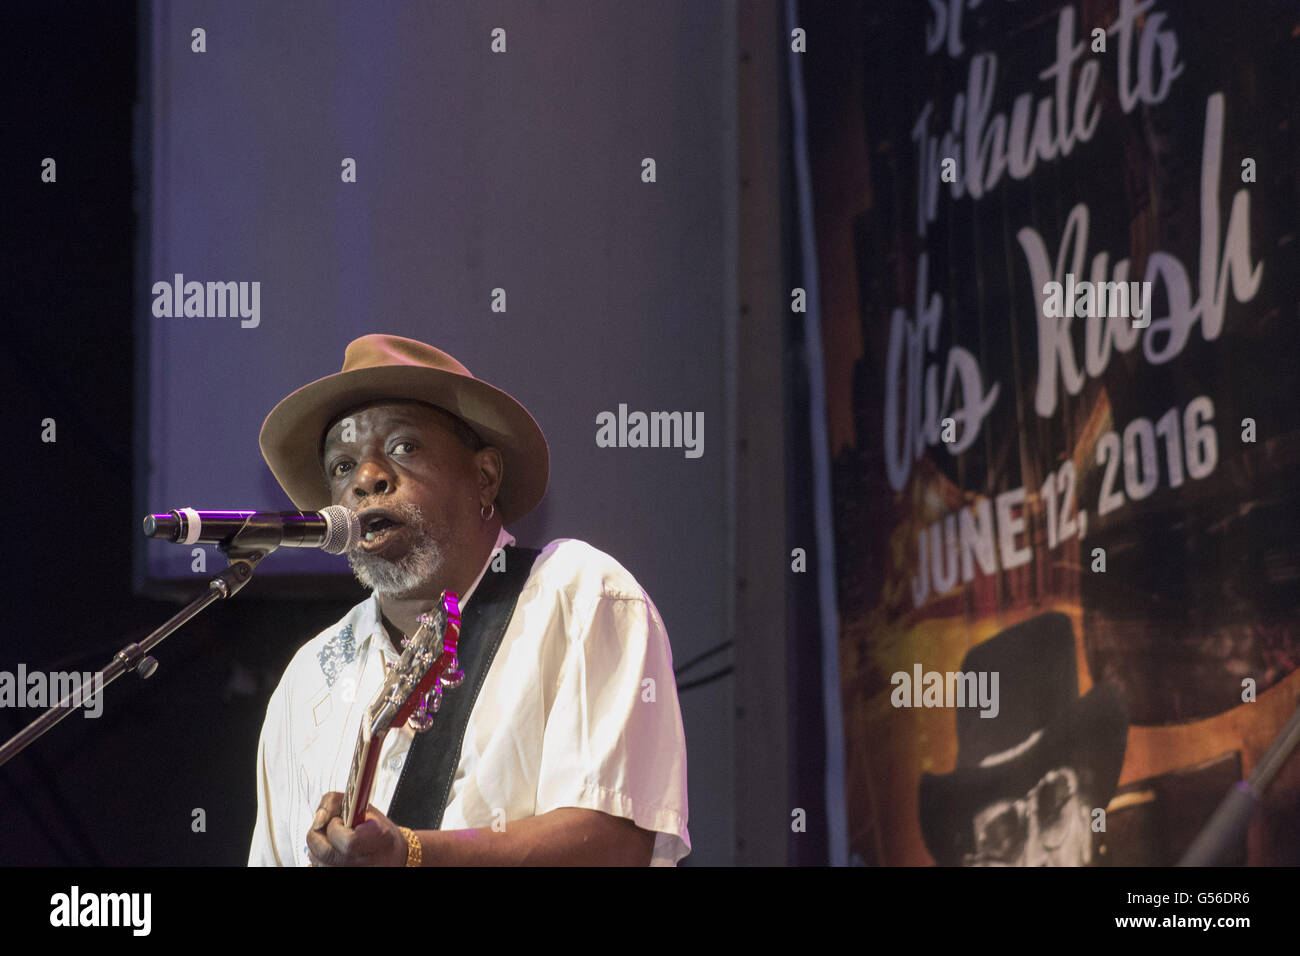 Chicago, IL, USA. 12th June, 2016. The 33rd annual Chicago Blue's Festival from June 10-12 had a stellar line-up this year. The Festival gave tribute to legendary blues guitarist Otis Rush. On Sunday night, Otis Rush appeared on stage, along with Chicago Mayor Rahm Emanuel who declared June 12th as Otis Rush Day in Chicago. The Festival culminated with music played by Otis's friends and other notable musicians who influenced his career. Pictured: Lurrie Bell © Karen I. Hirsch/ZUMA Wire/Alamy Live News Stock Photo